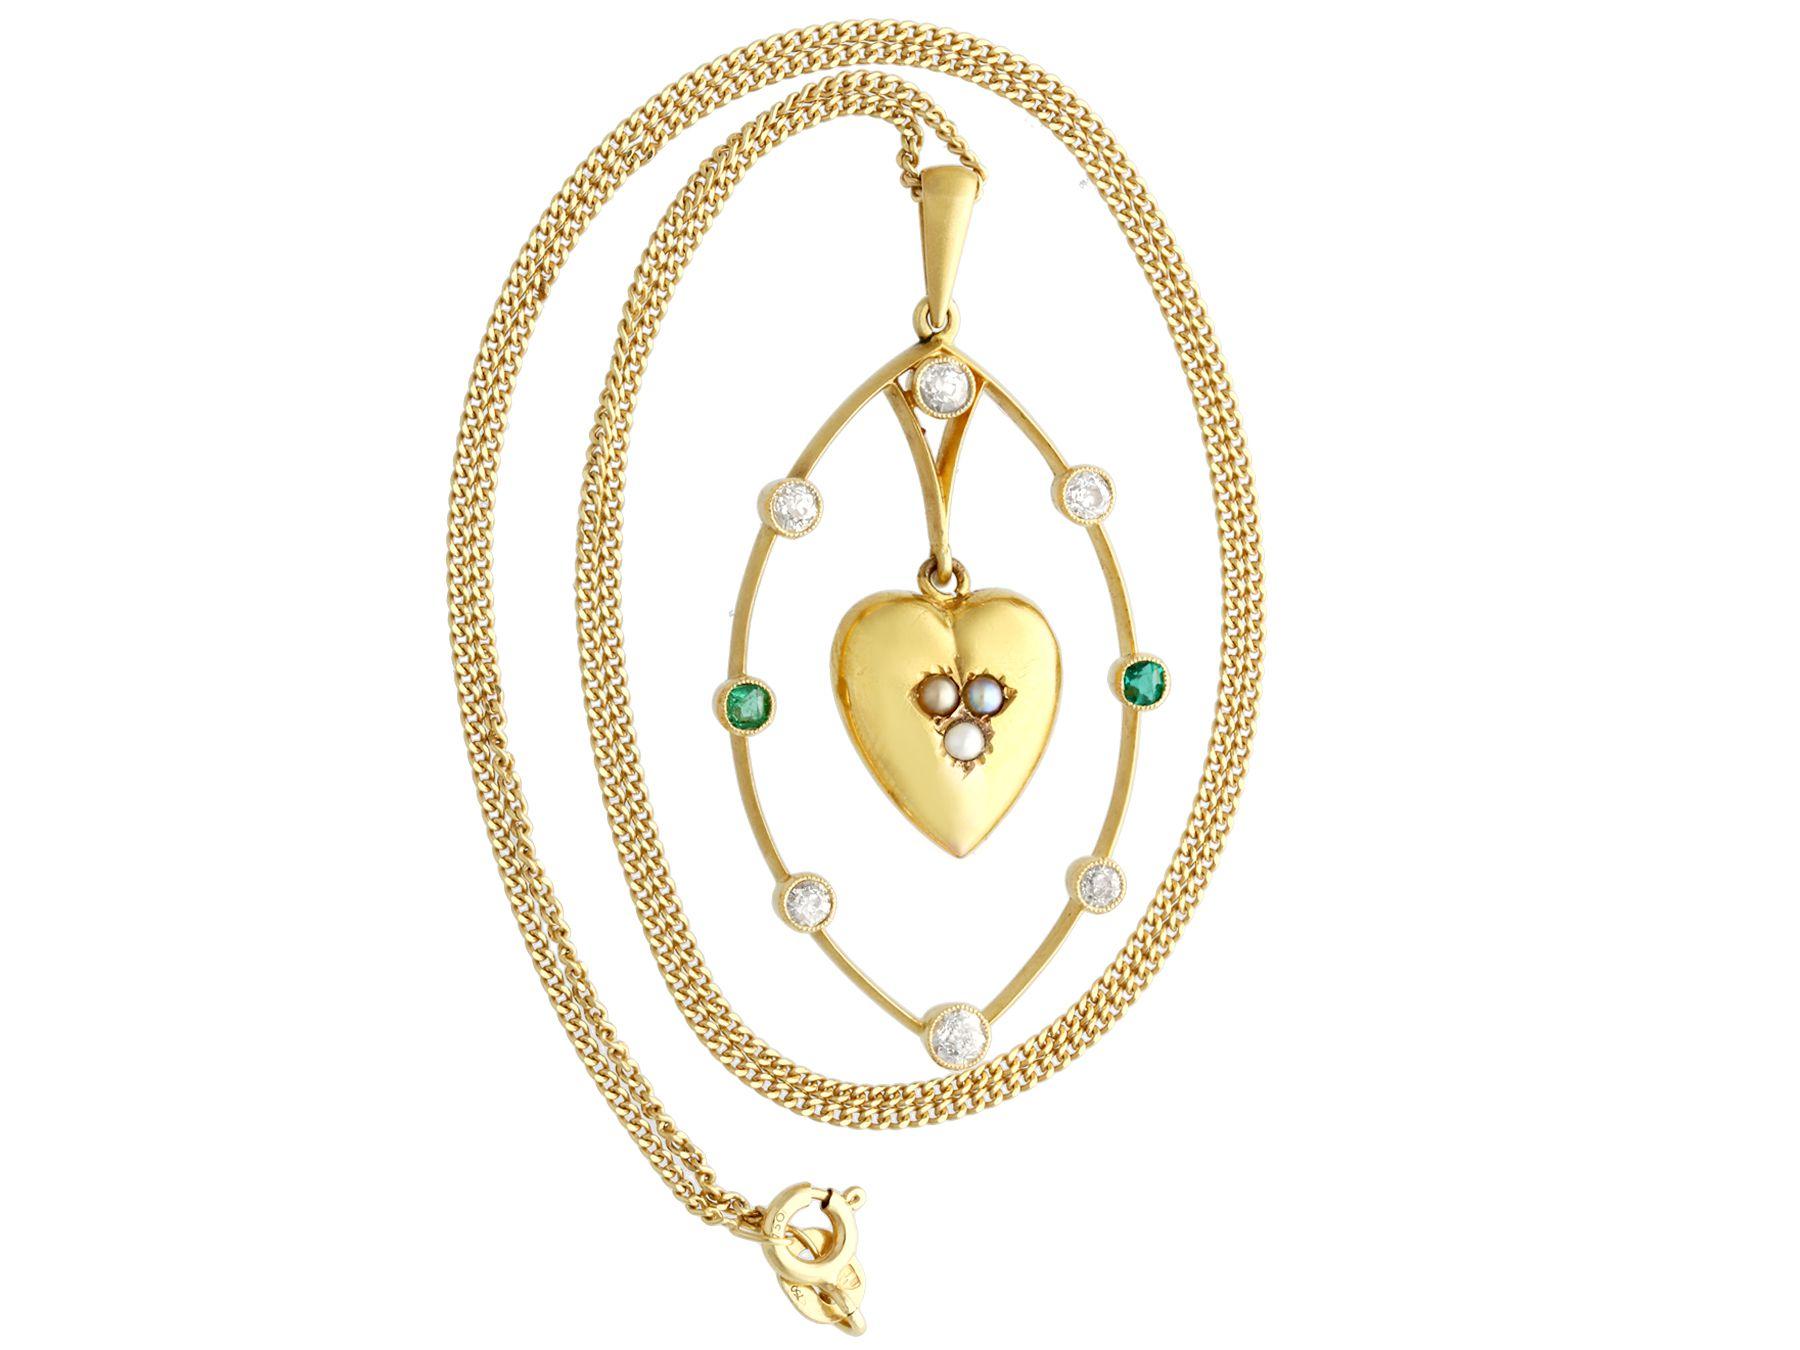 A fine and impressive antique Victorian 0.51 carat diamond, 0.10 carat emerald, seed pearl and 18 carat yellow gold heart pendant; part of our our diverse antique emerald pendant collections.

This impressive antique Victorian pendant has been